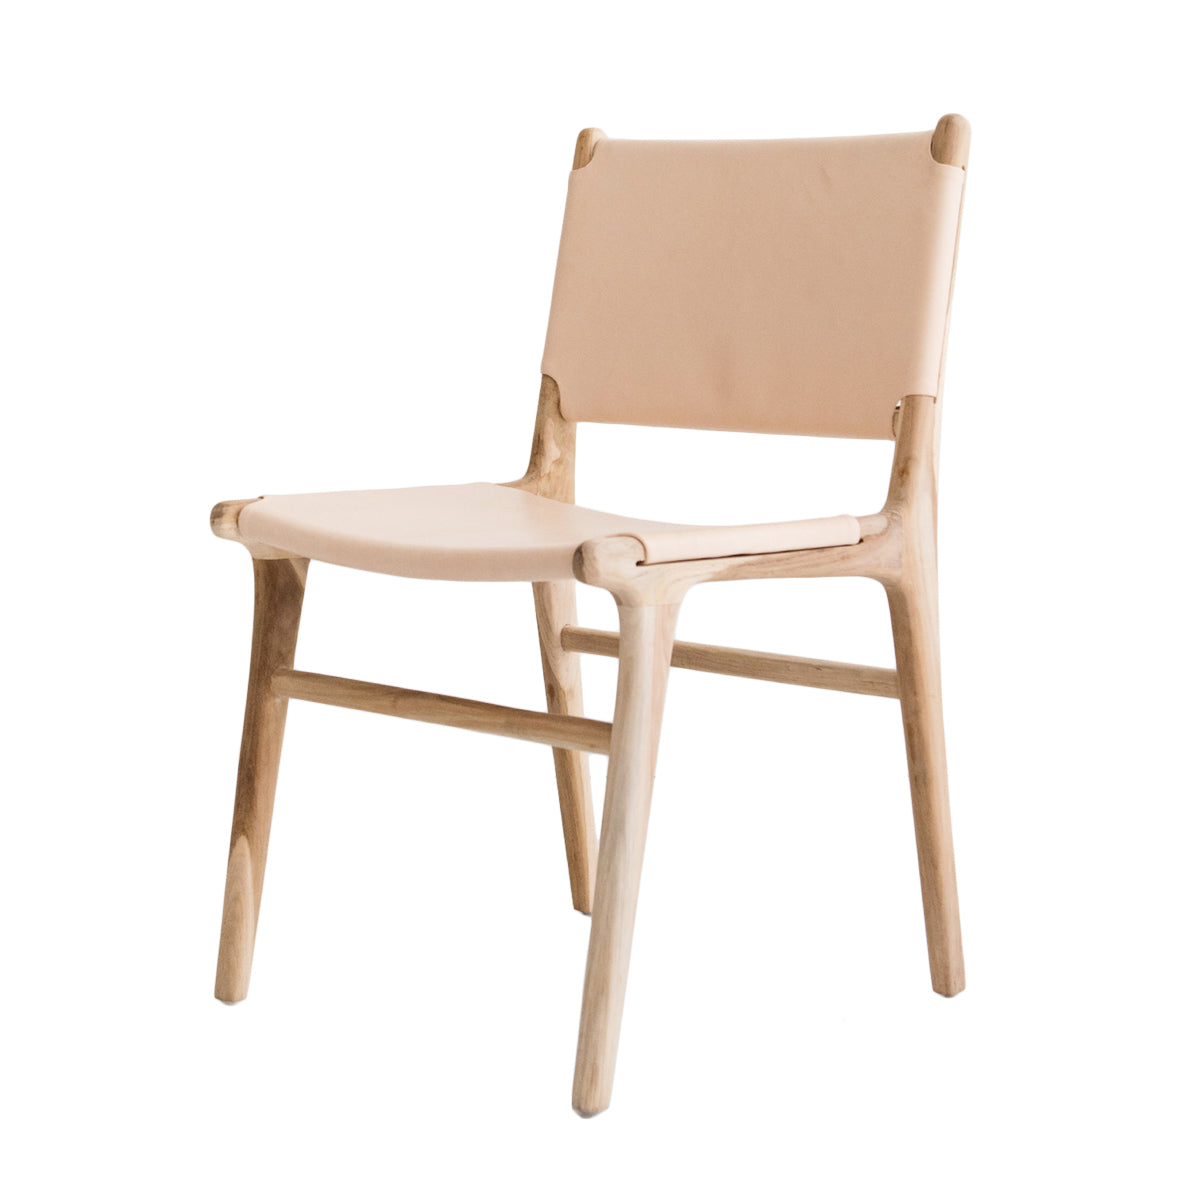 Bella Dining Chair - Blush Leather